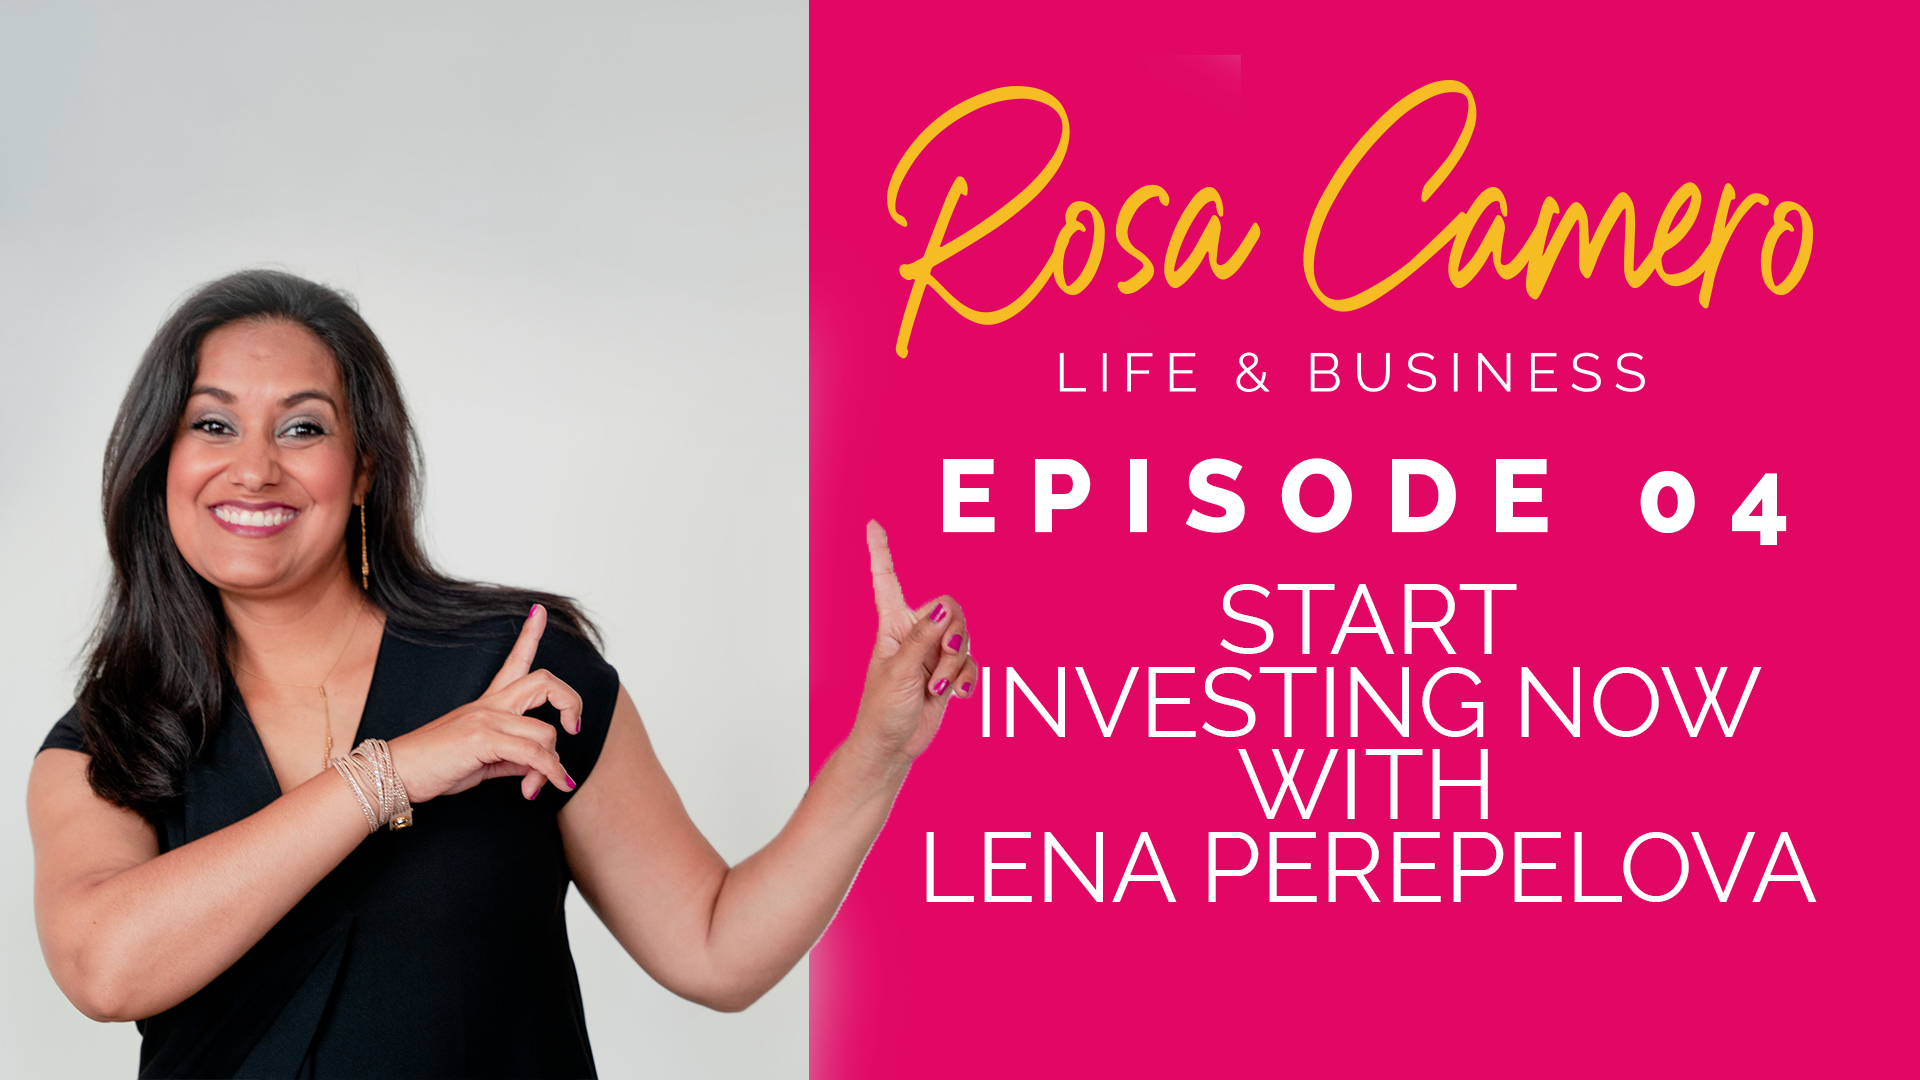 You are currently viewing Life & Business by Rosa Camero Episode 04: Start Investing Now With Lena Perepelova